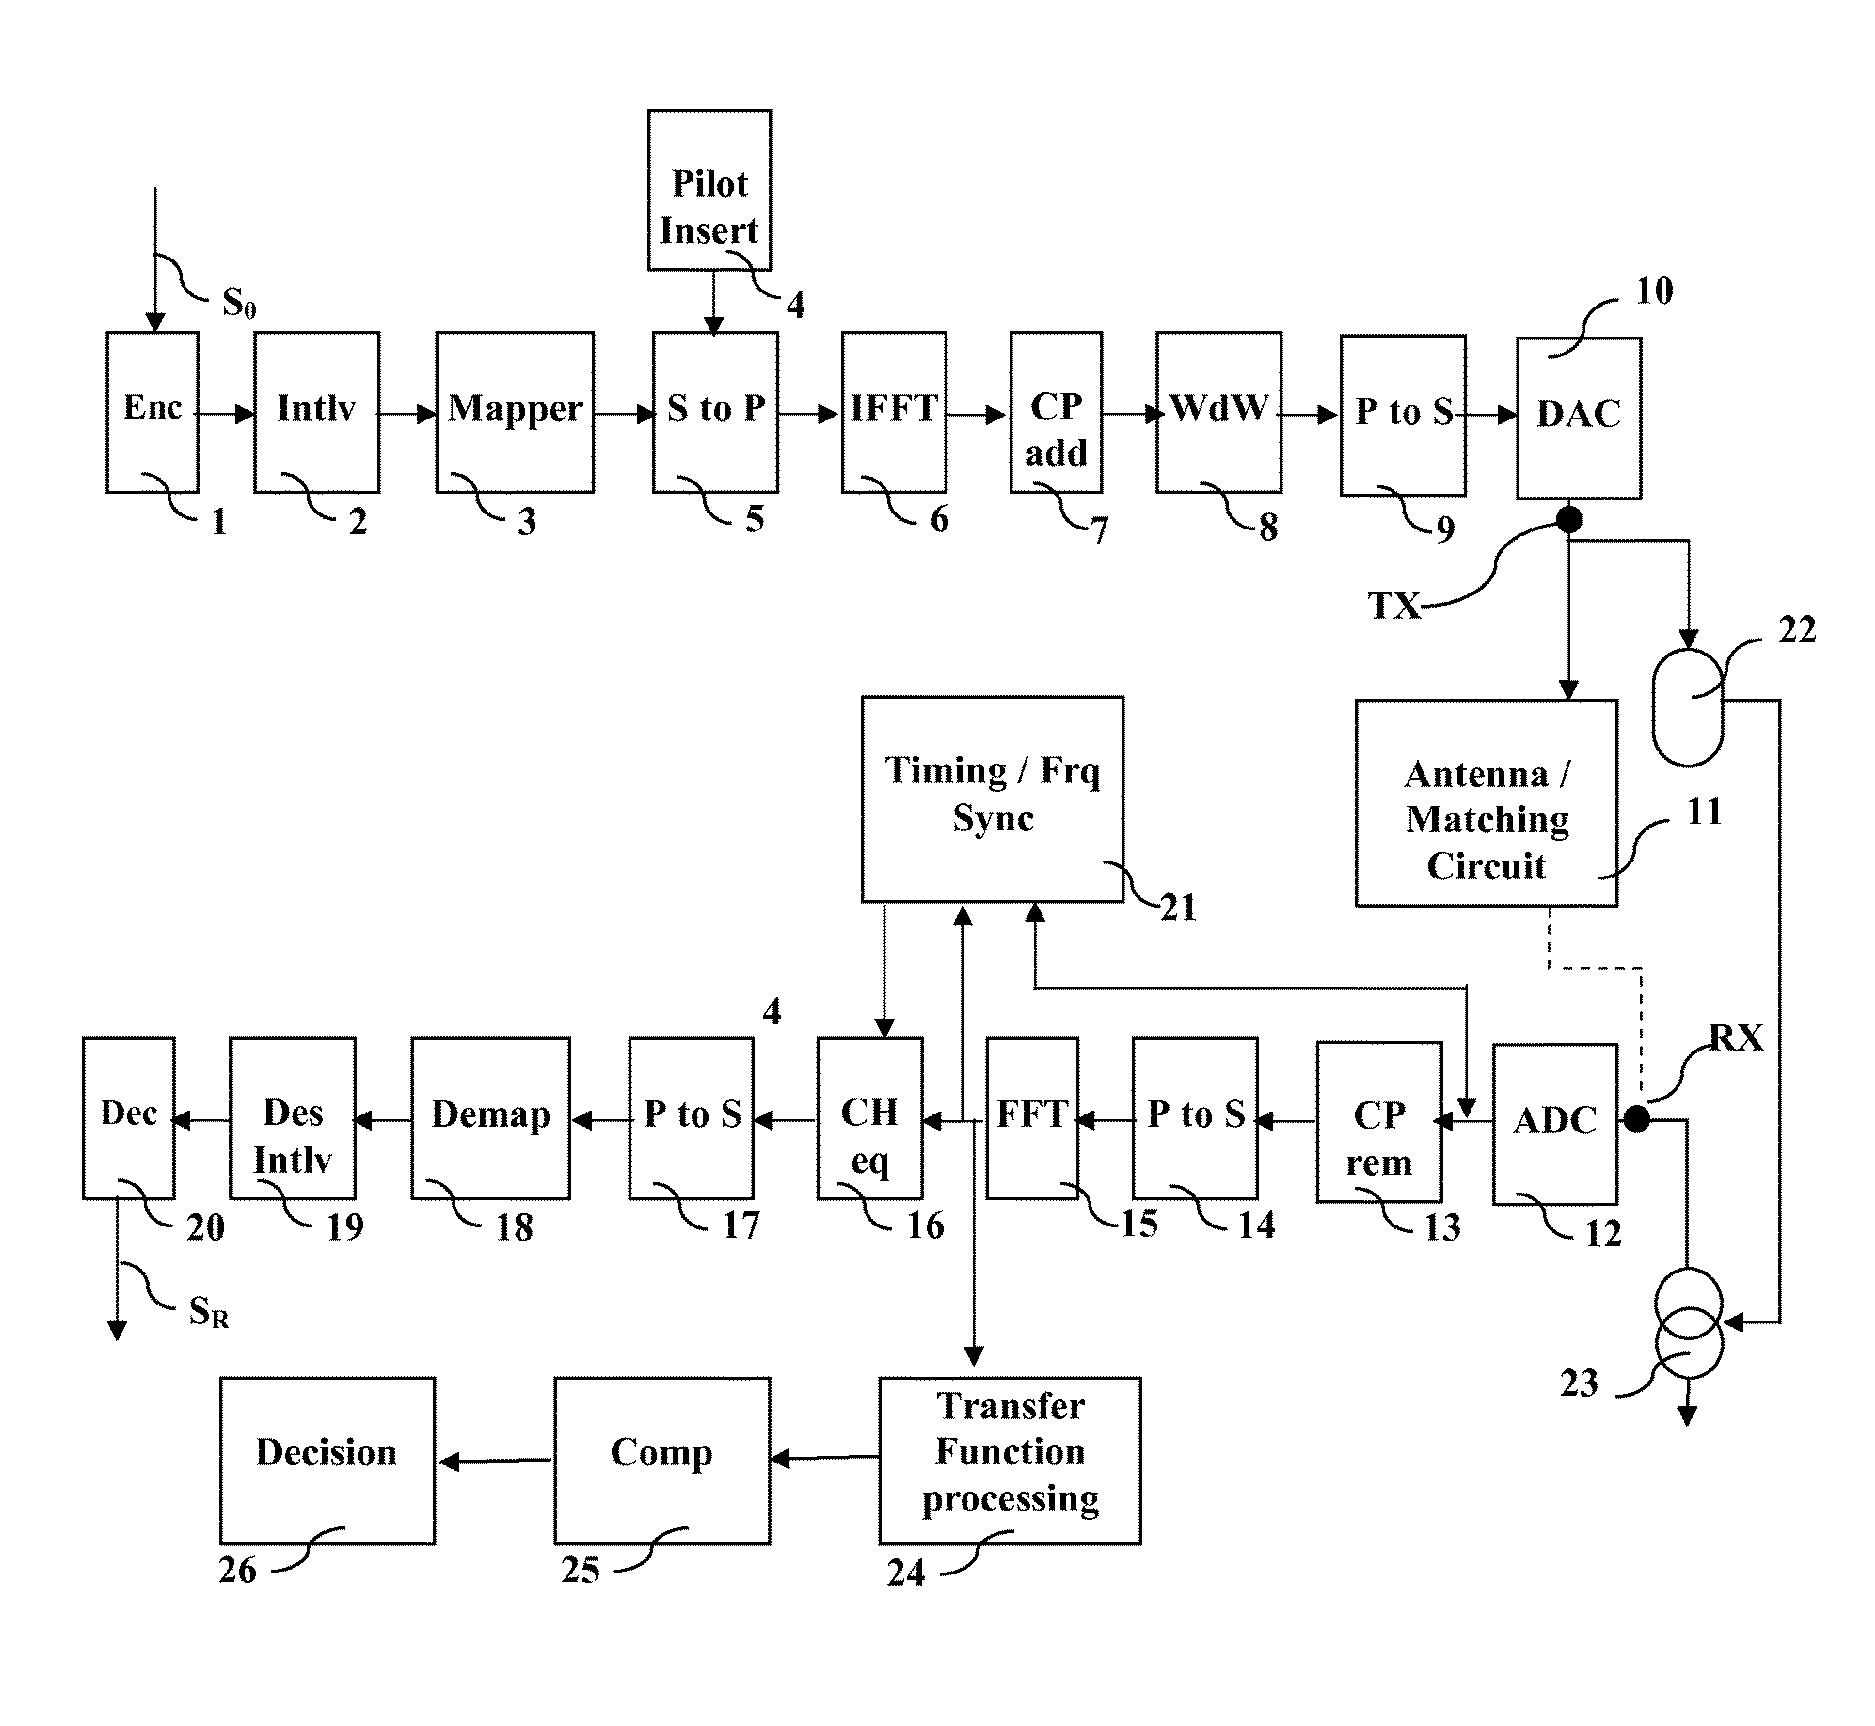 Built-in self-test technique for detection of imperfectly connected antenna in OFDM transceivers